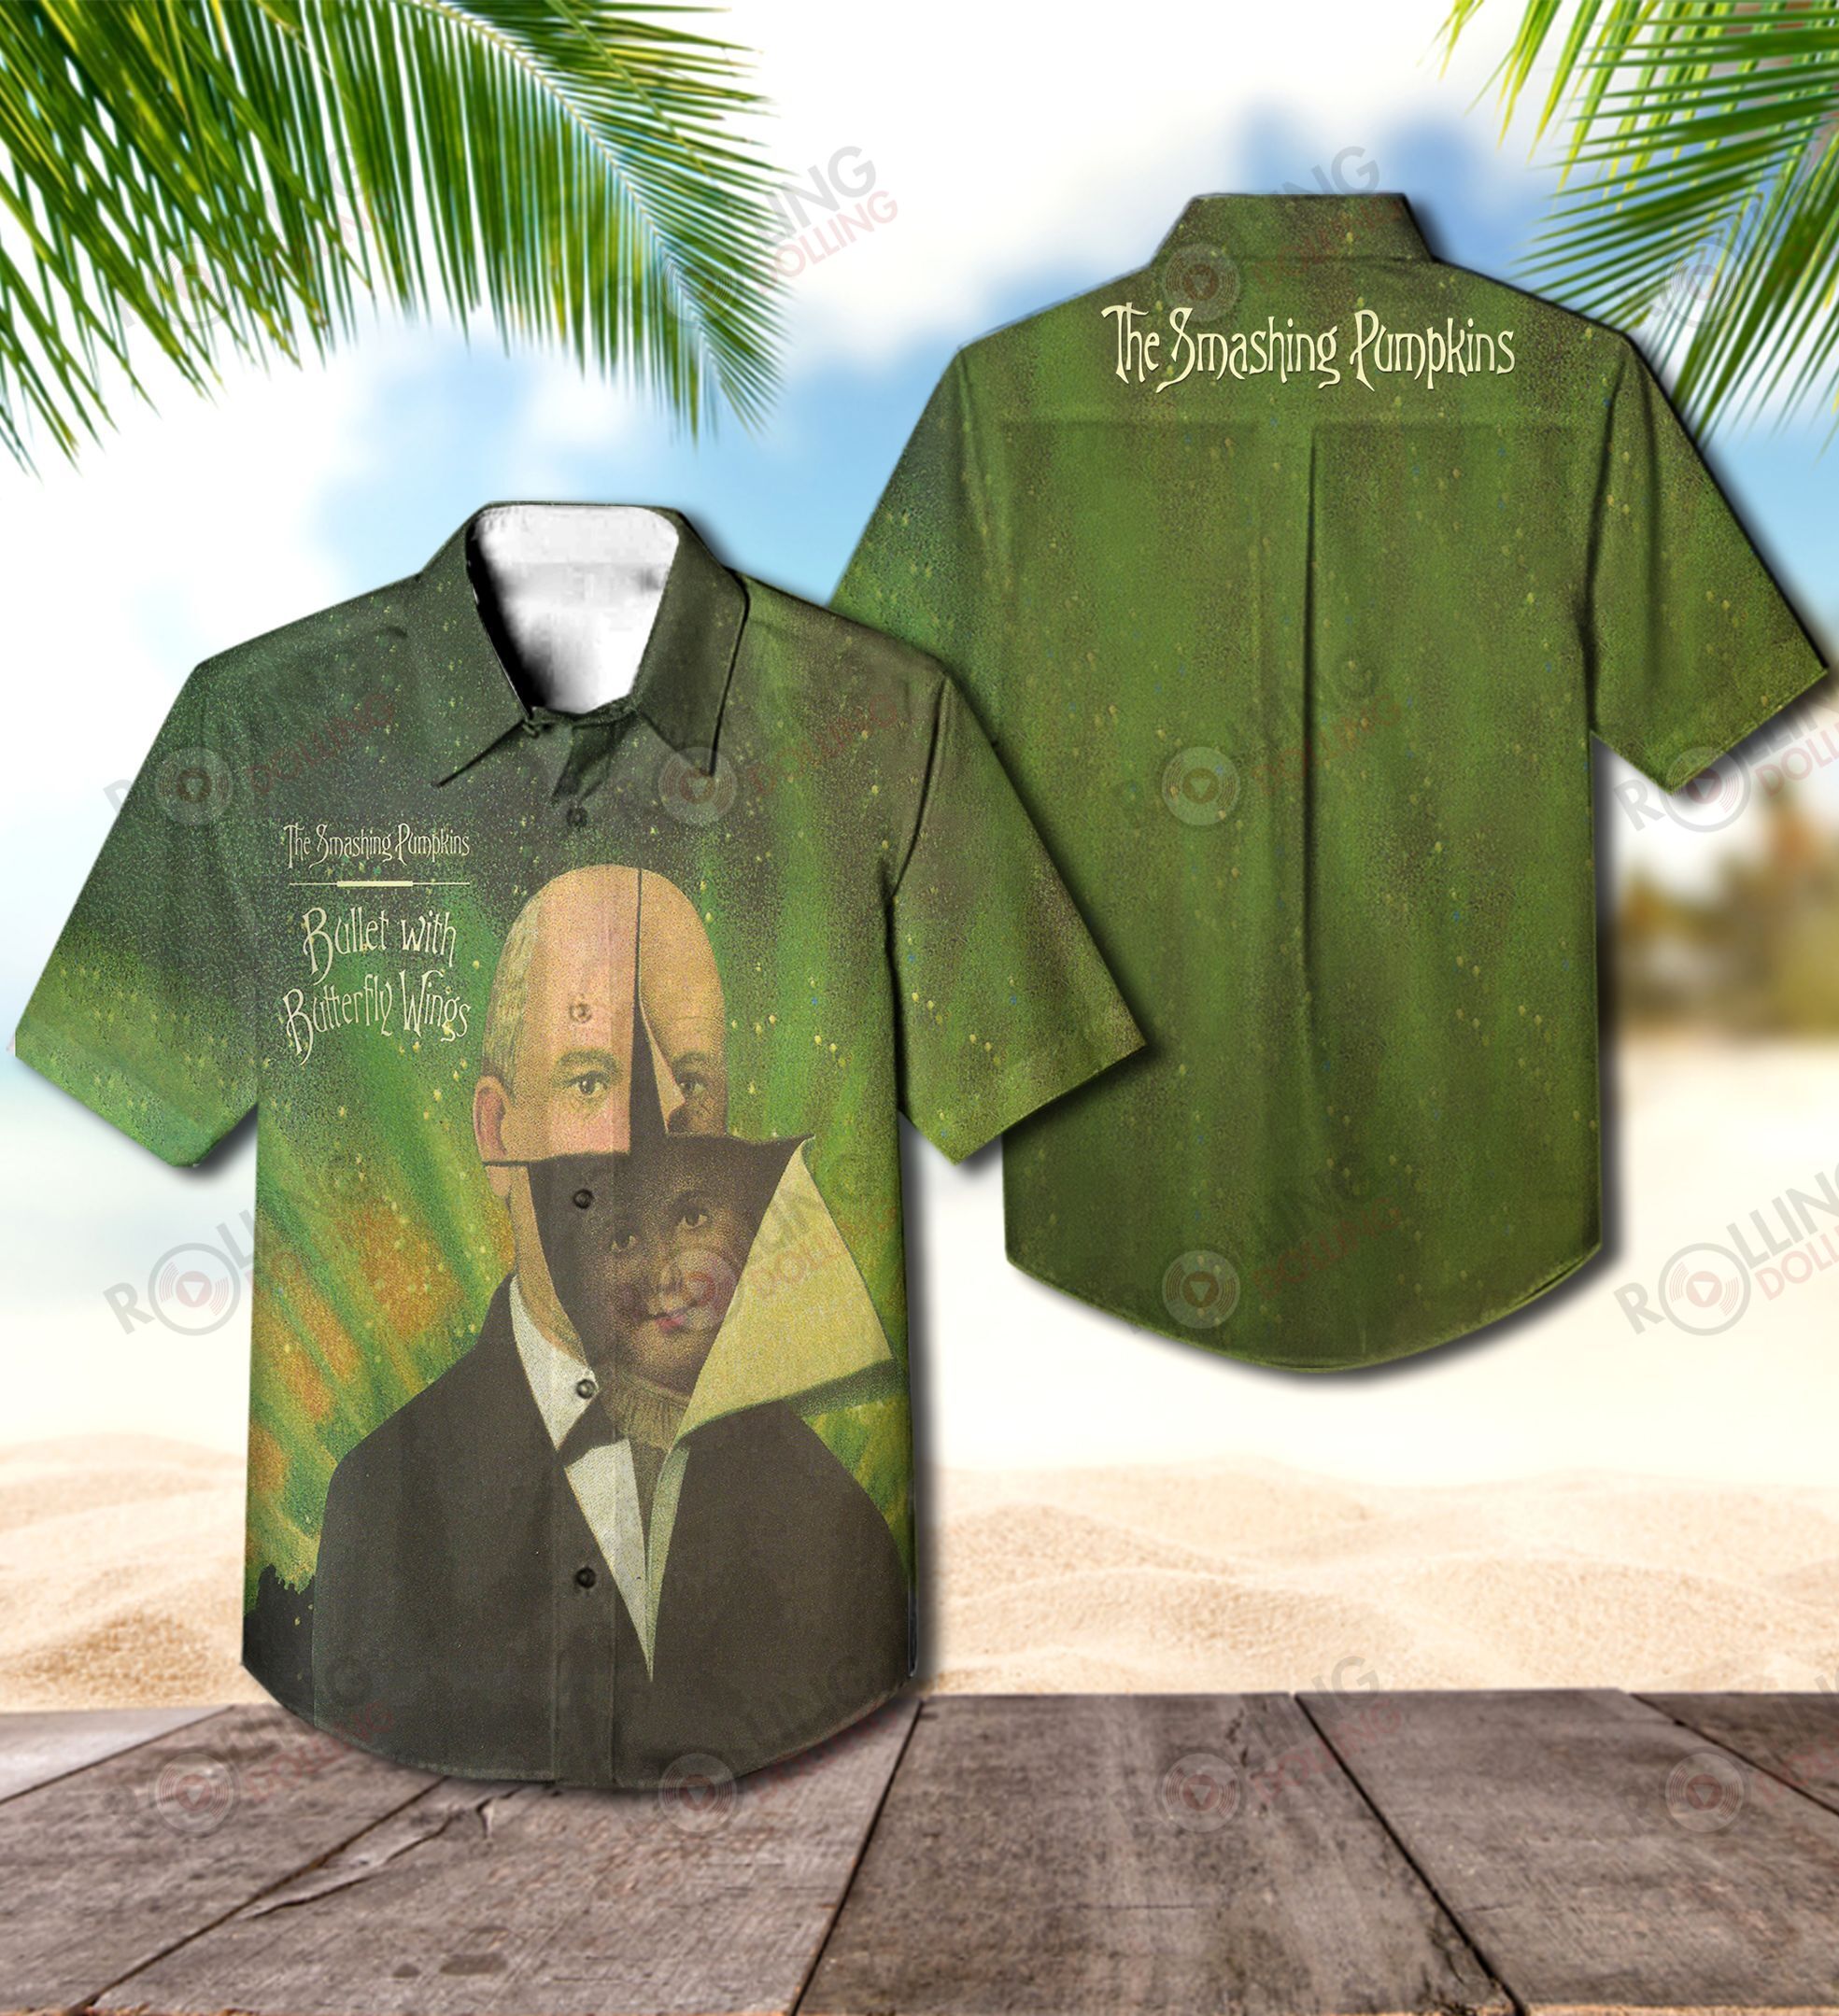 For summer, consider wearing This Amazing Hawaiian Shirt shirt in our store 89